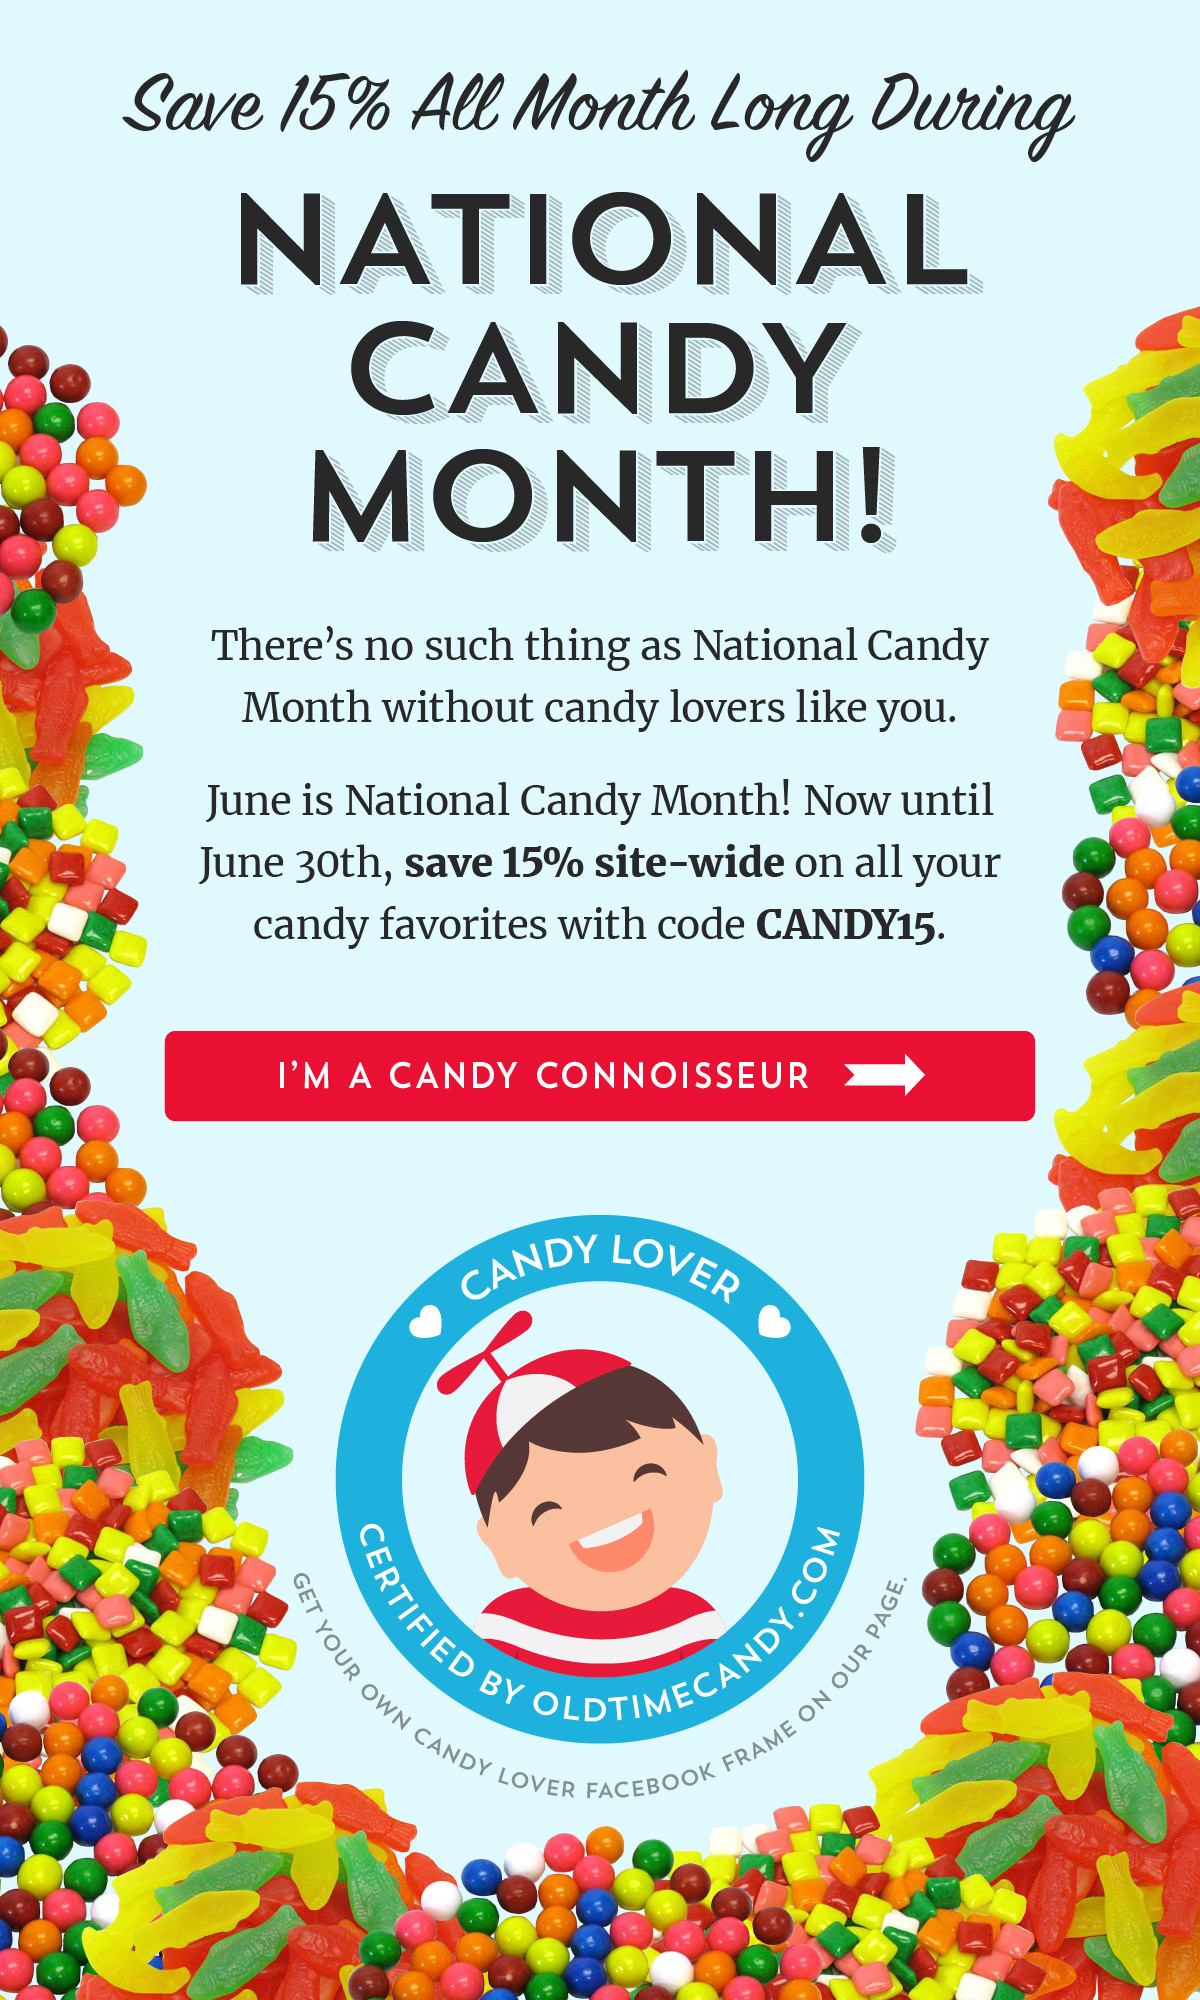 National Candy Month Promo Image